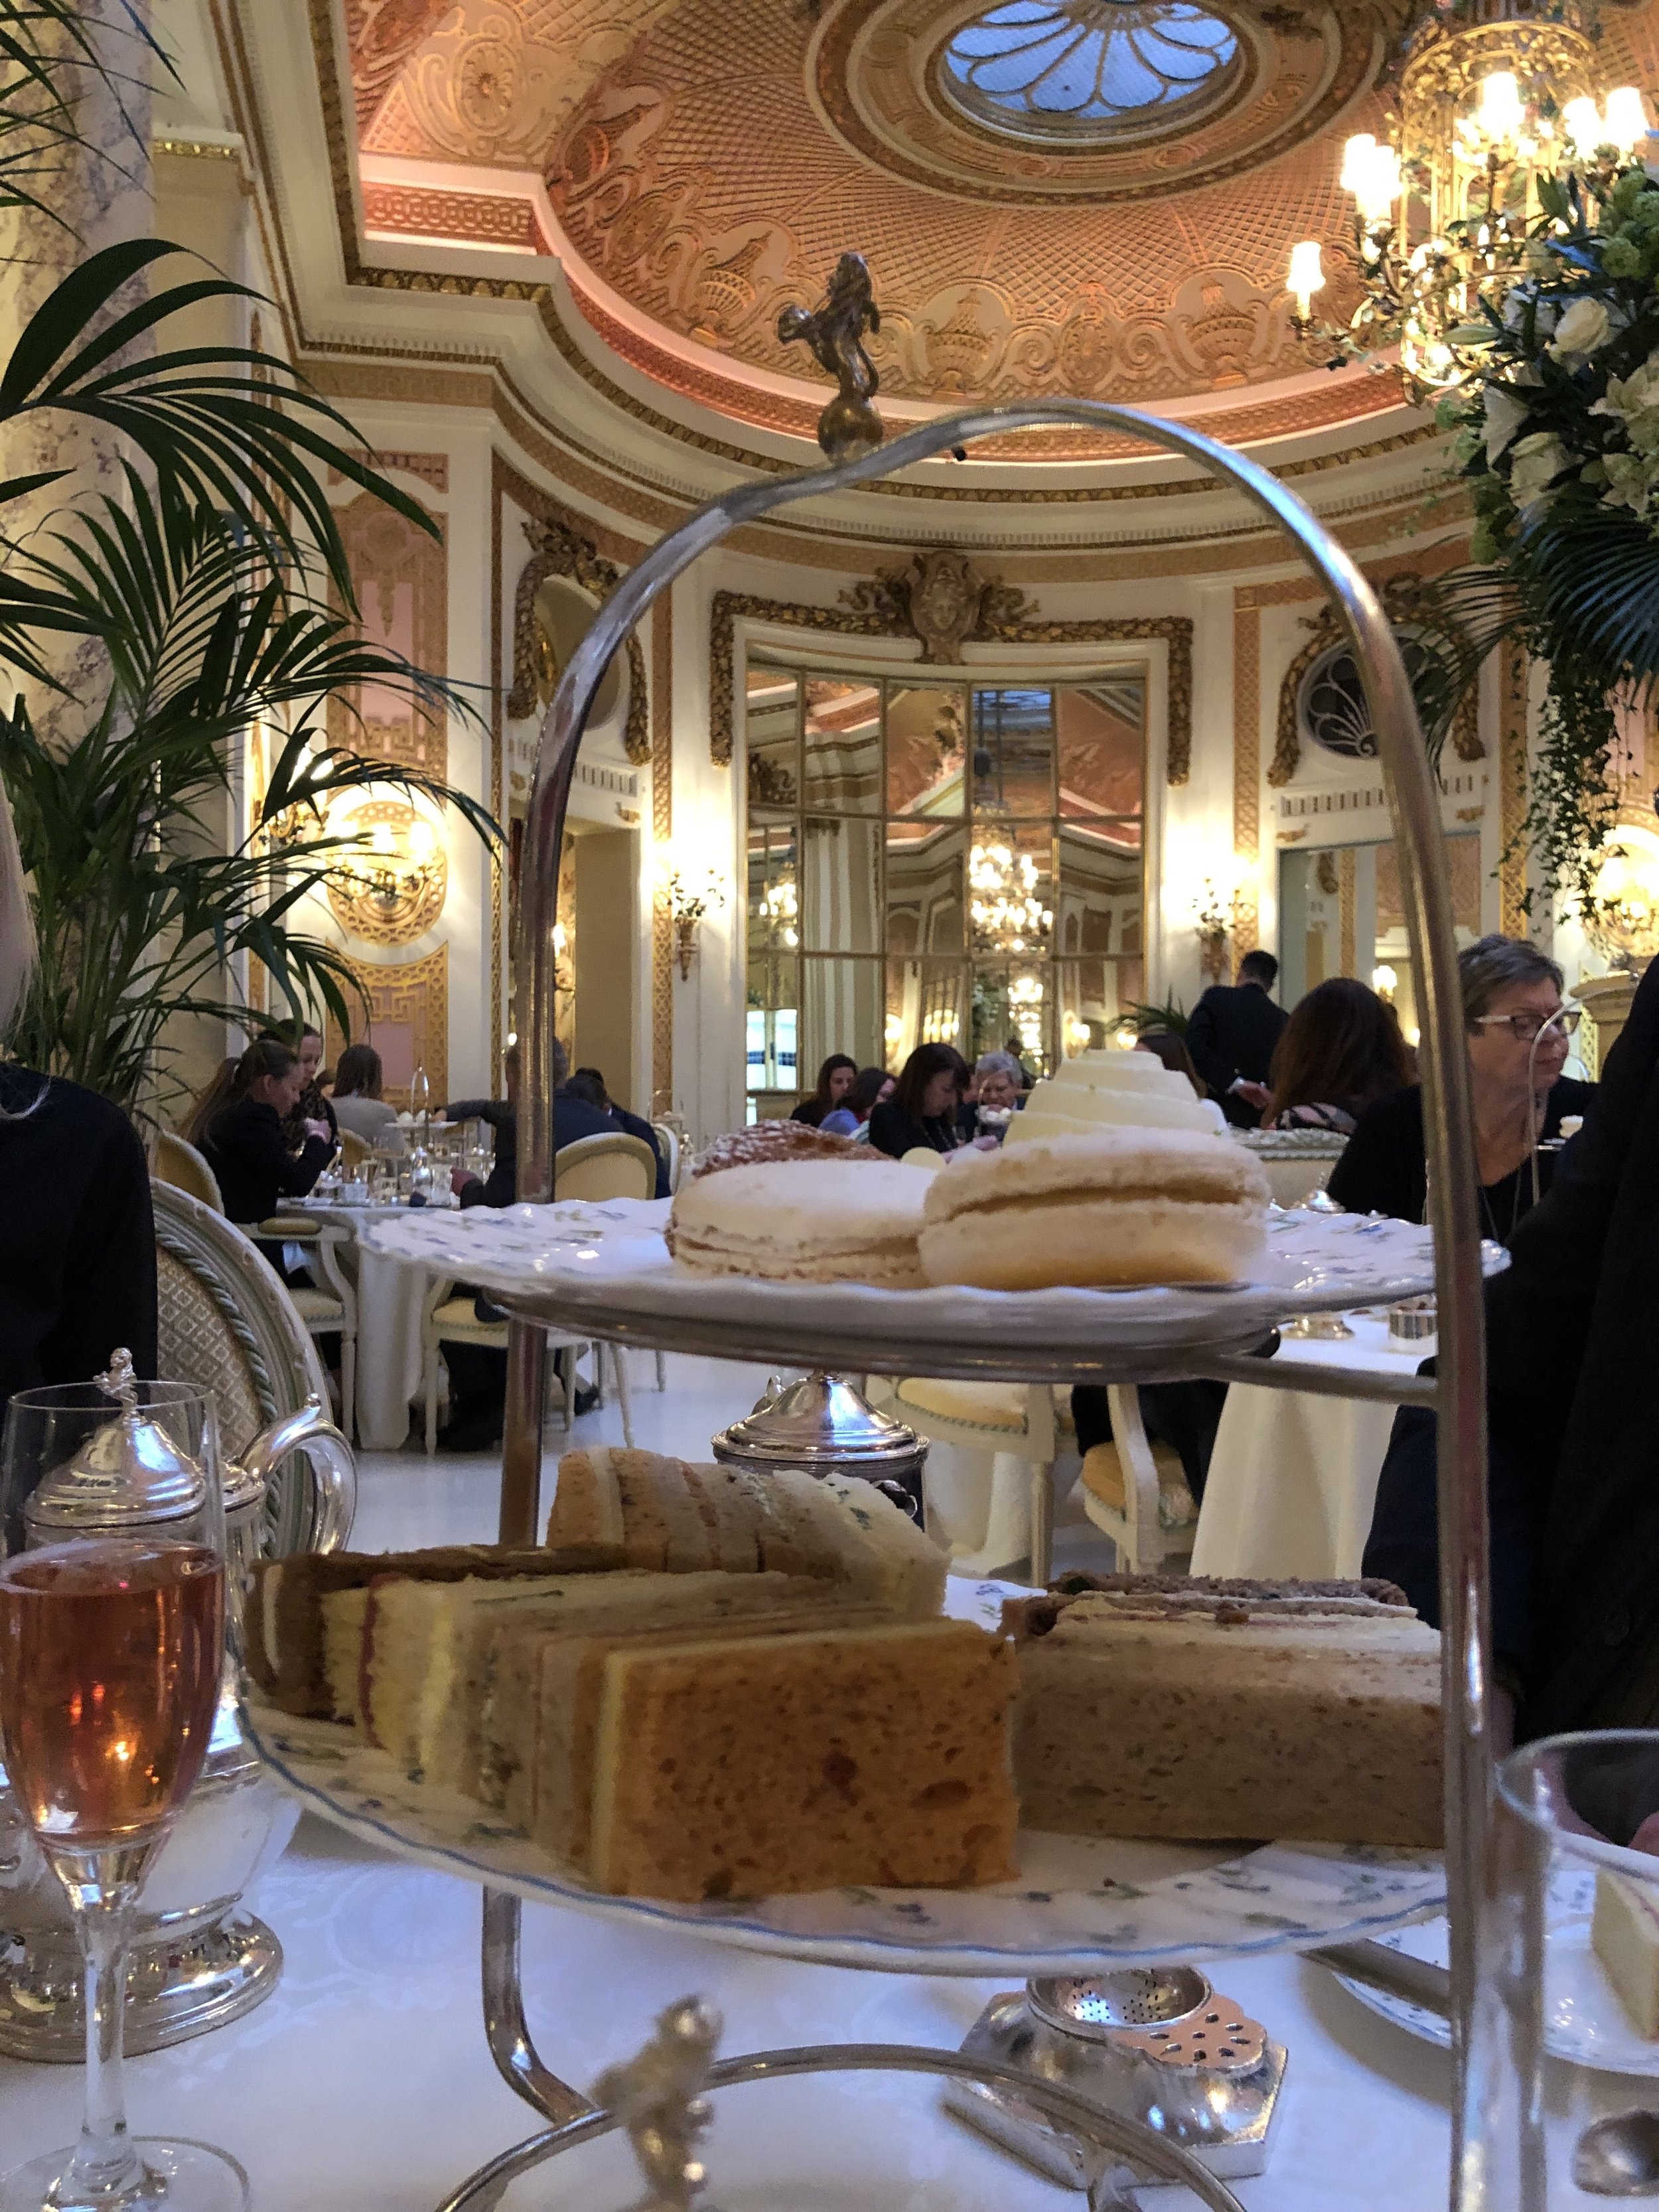 Afternoon Tea at the Ritz in London, England